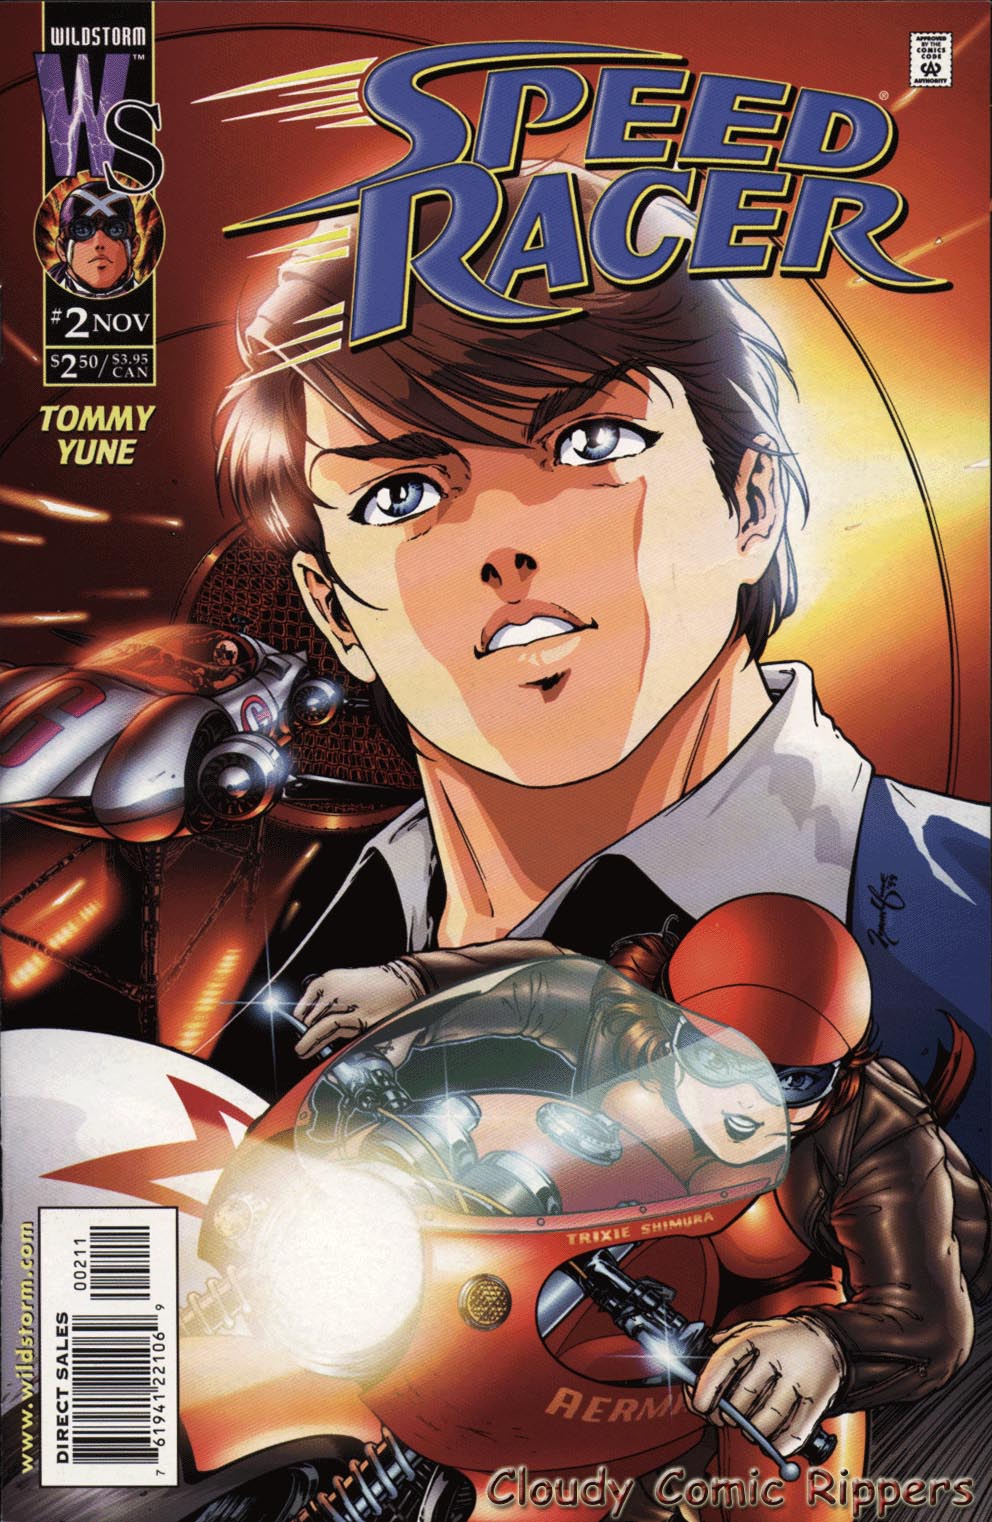 Read online Speed Racer comic -  Issue #2 - 1